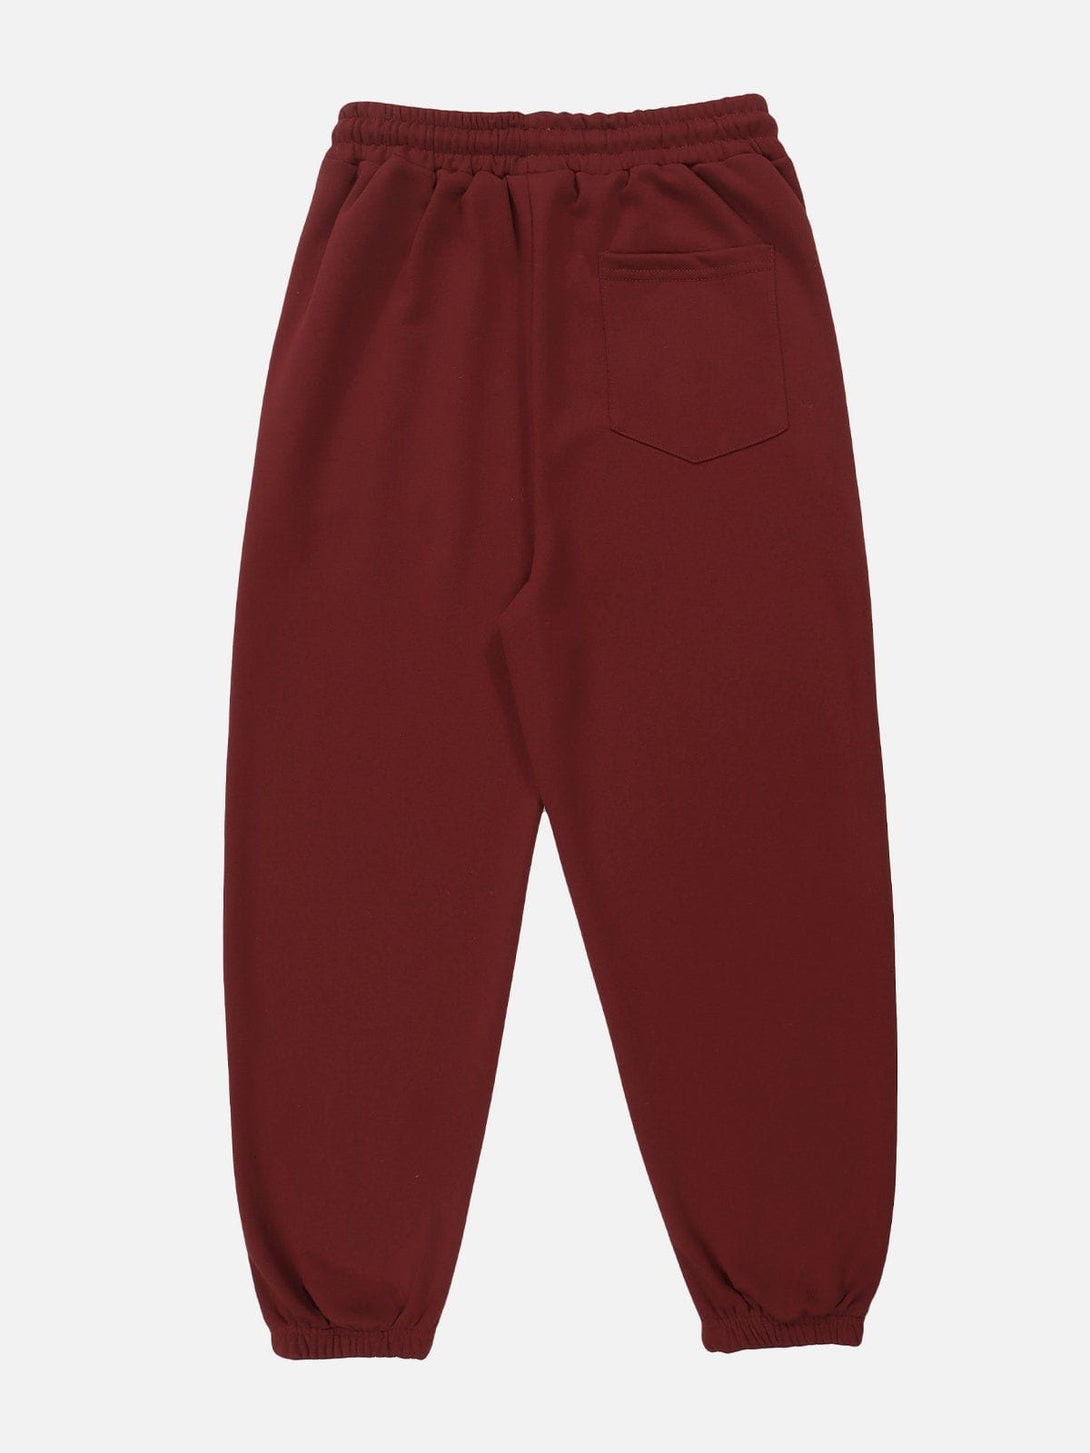 Levefly - Solid Color Beach Print Sweatpants - Streetwear Fashion - levefly.com